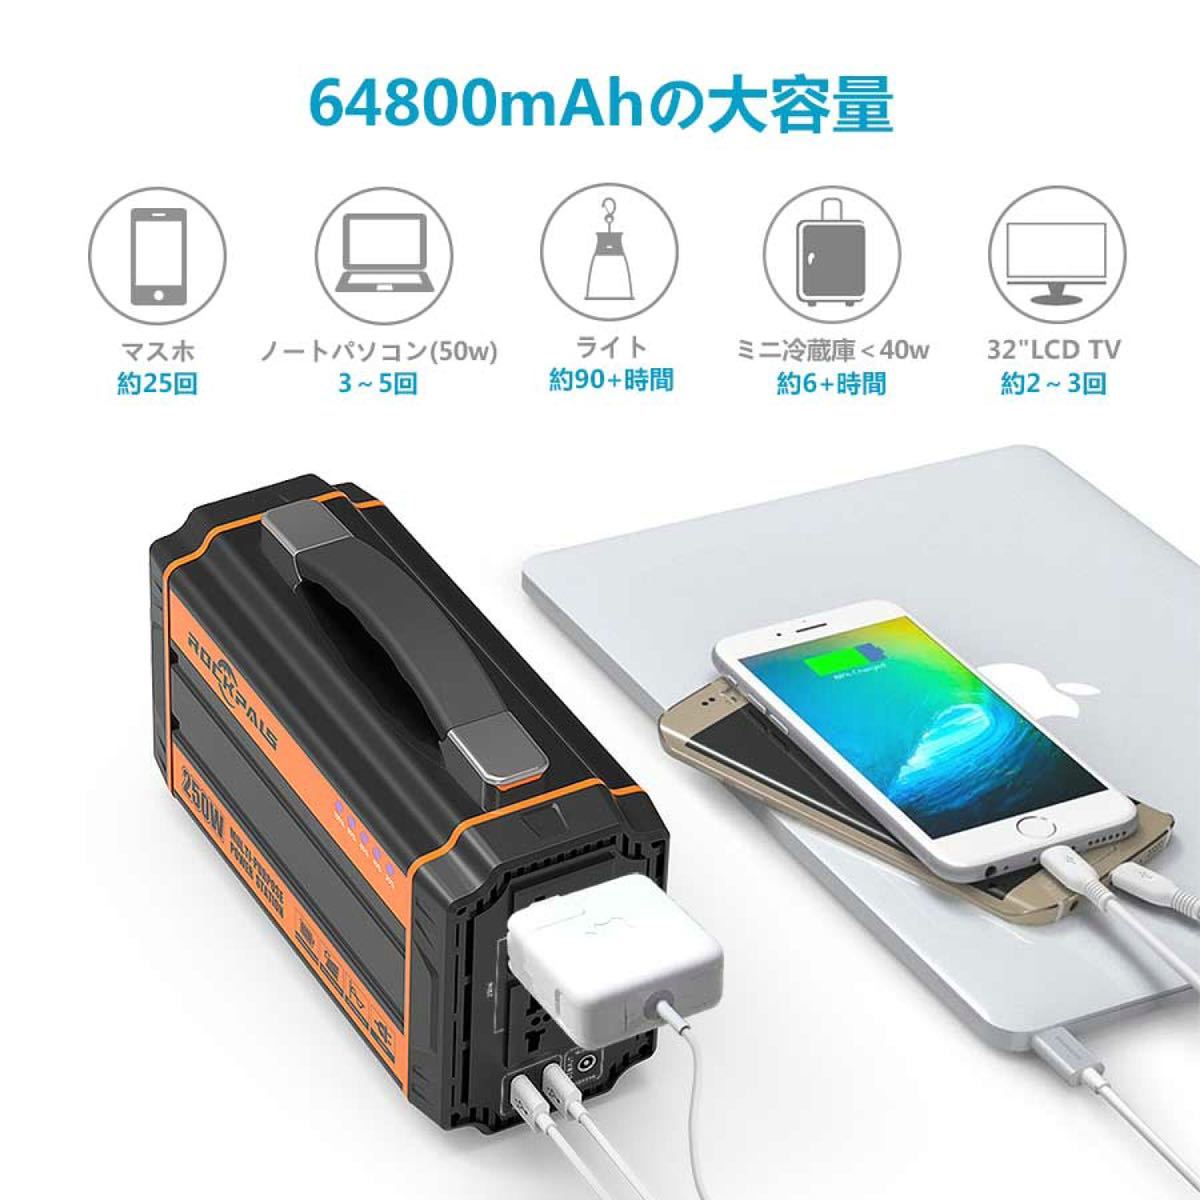  portable power supply high capacity 64800mAh 250W pcs windshield woe small size generator DC&AC&USB output outdoor camp sleeping area in the vehicle urgent hour .. for house for . battery 